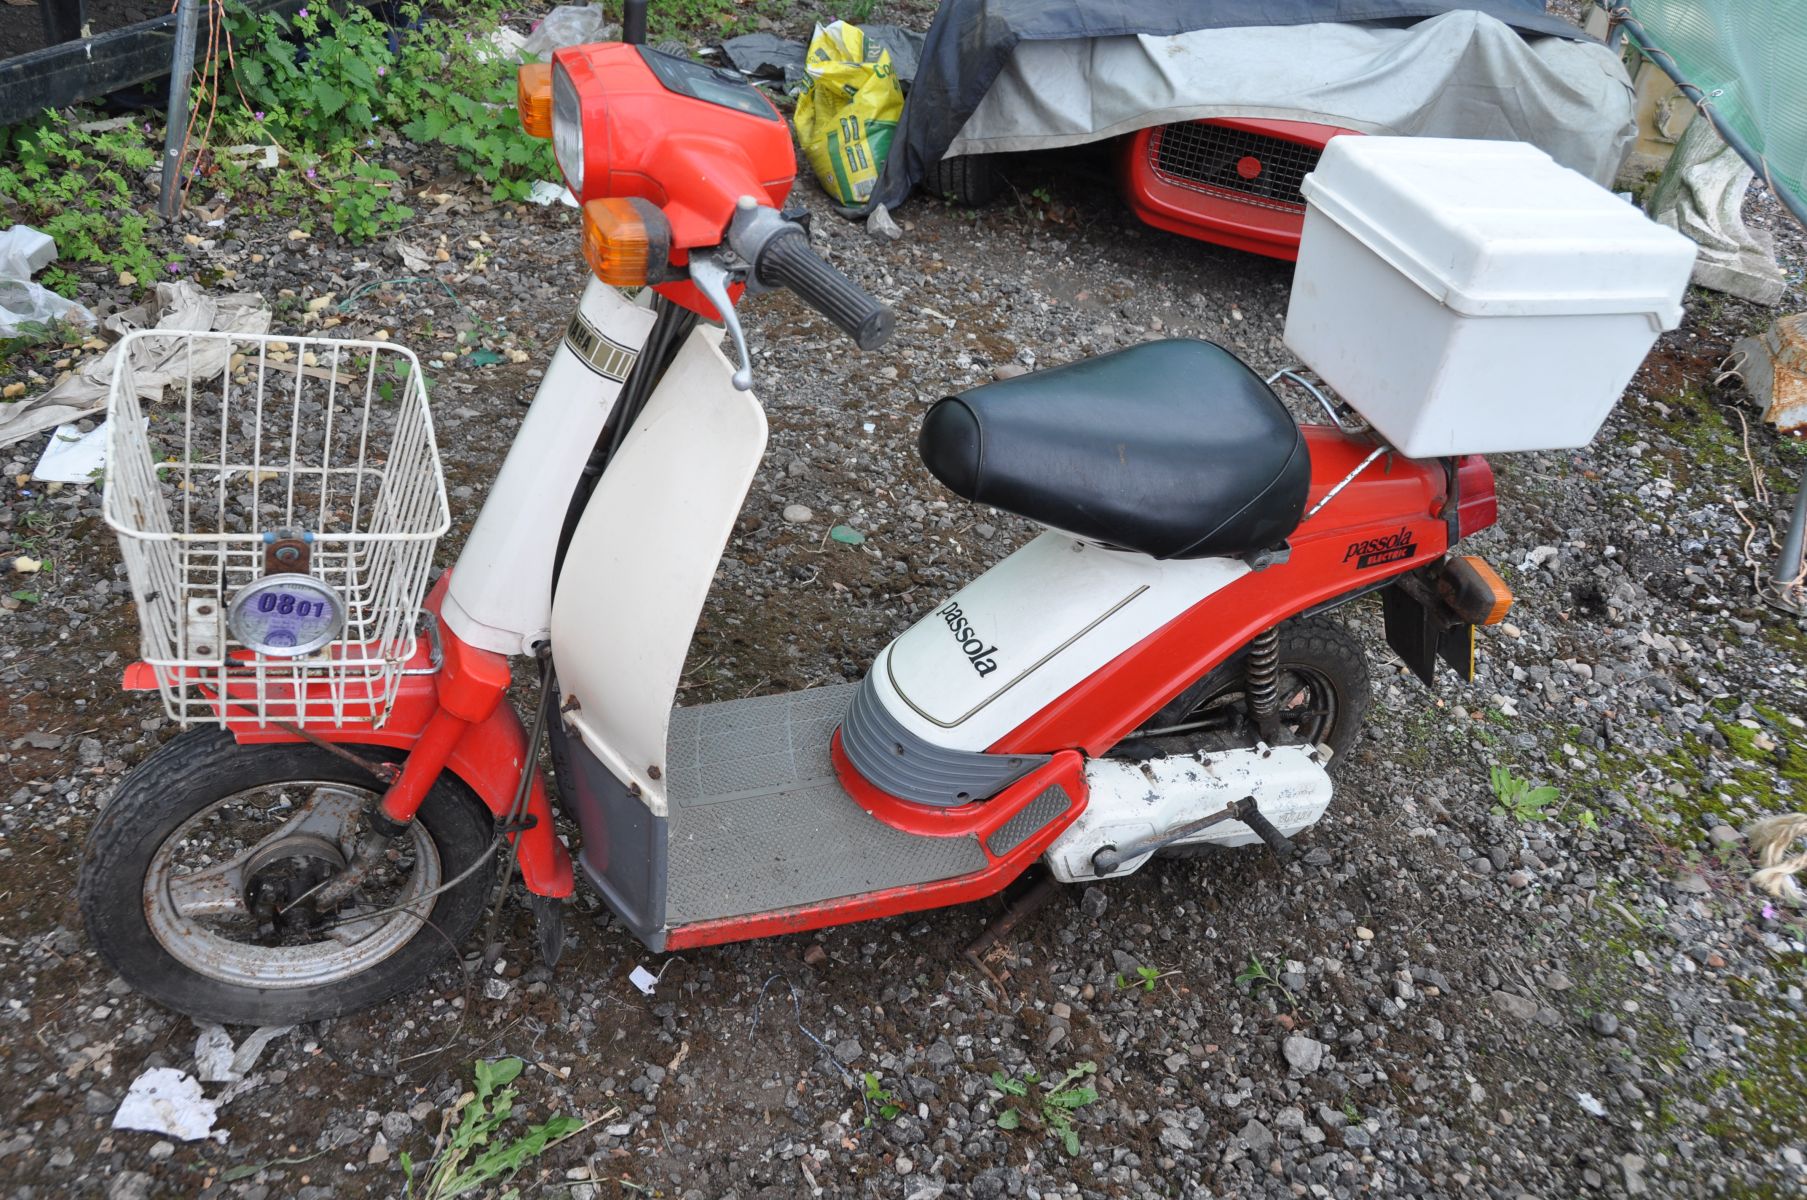 A 1983 YAMAHA PASSOLA 49cc MOPED in red and cream, no keys, no V5, first Registered 02/1983 under